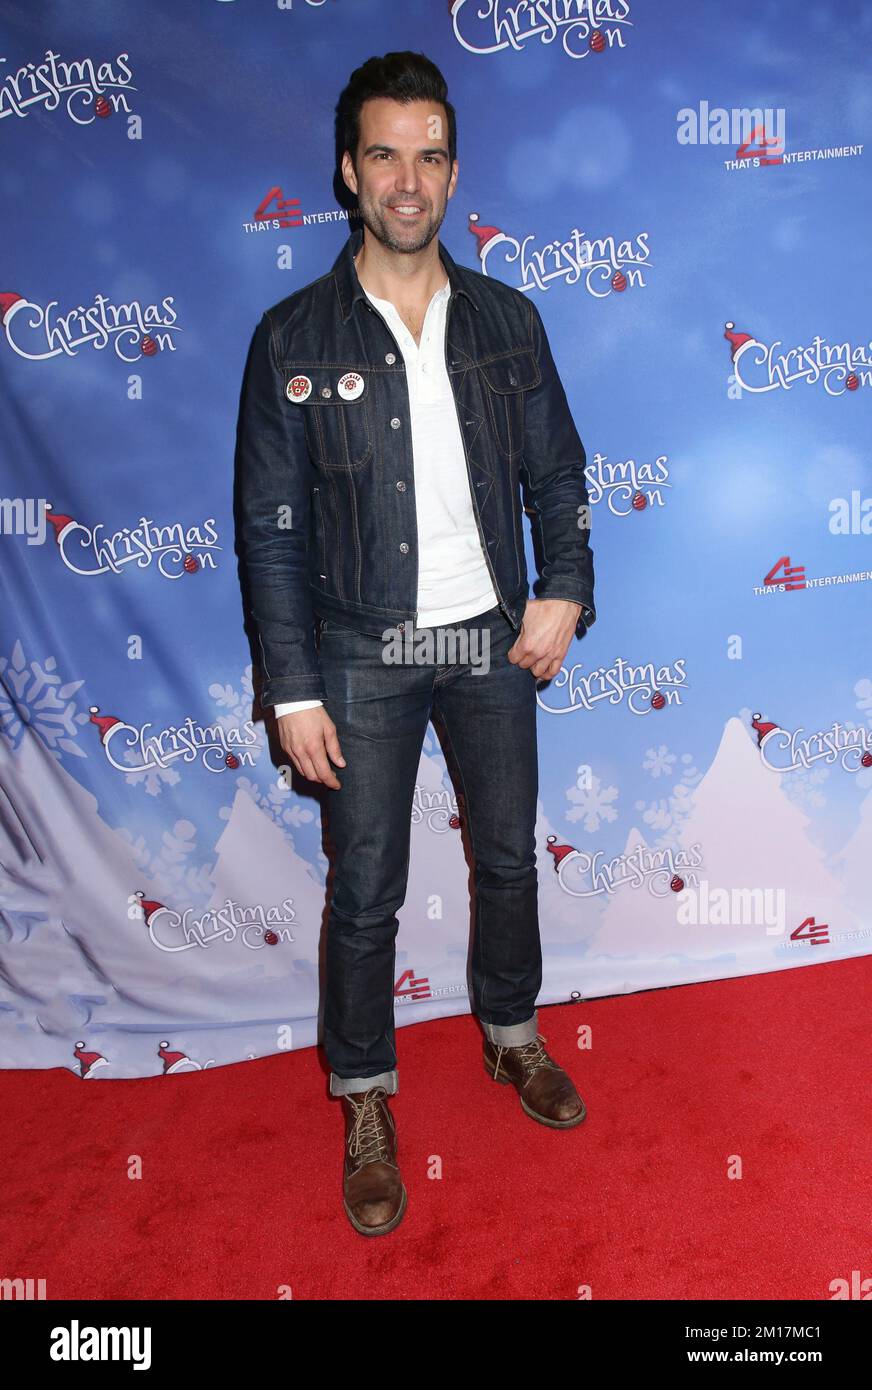 New Jersey, USA. 10th Dec, 2022. Benjamin Ayres attending the 3rd Annual Christmas Con held at the New Jersey Expo Center on December 10, 2022 in Edison, NJ ©Steven Bergman/AFF-USA.COM Credit: AFF/Alamy Live News Stock Photo